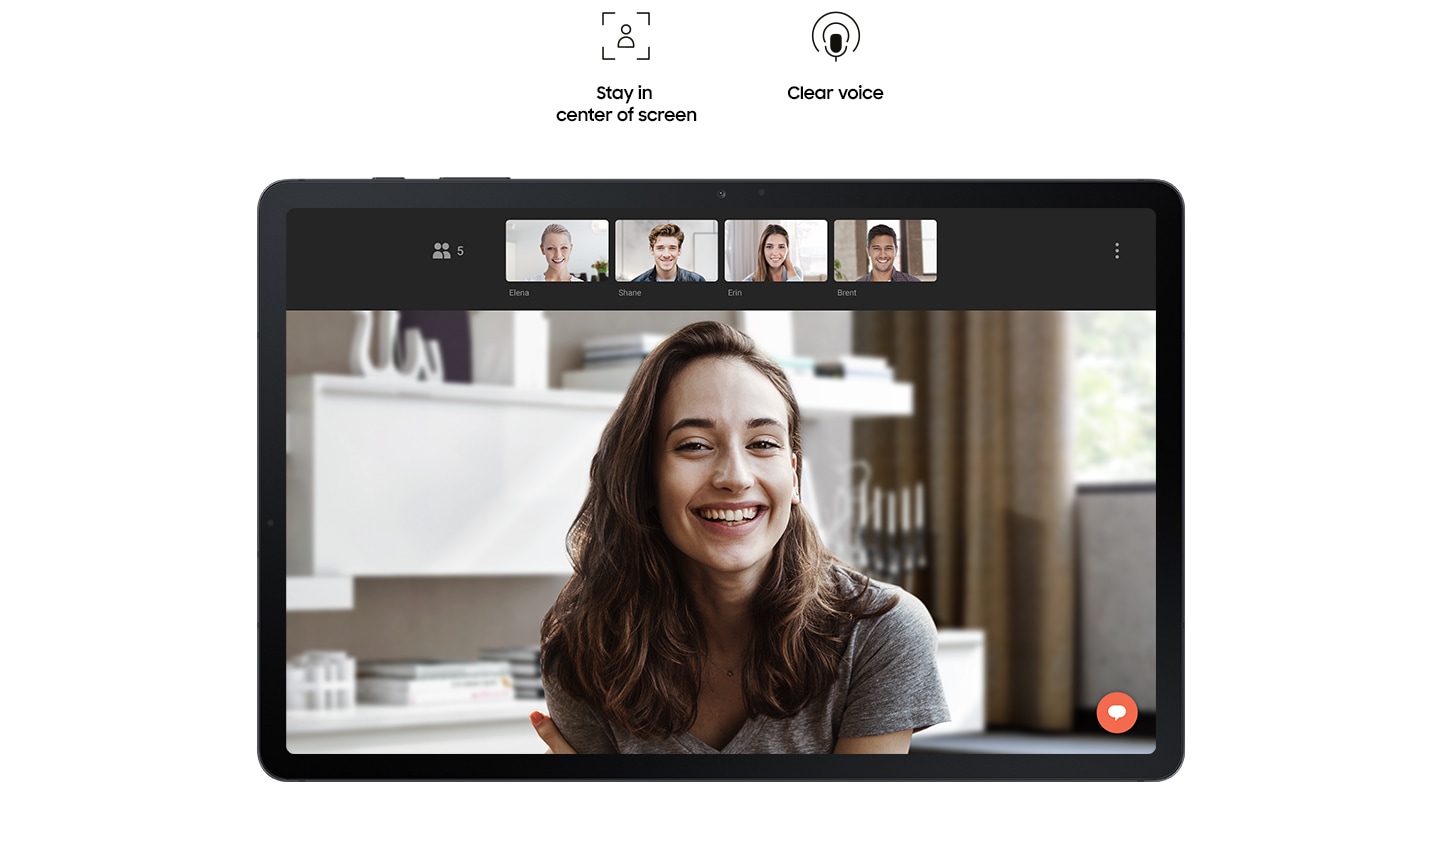 Galaxy Tab S7 FE 5G seen from the front with a video chat onscreen between a woman and four friends. Icons say Stay in center of screen and clear voice.